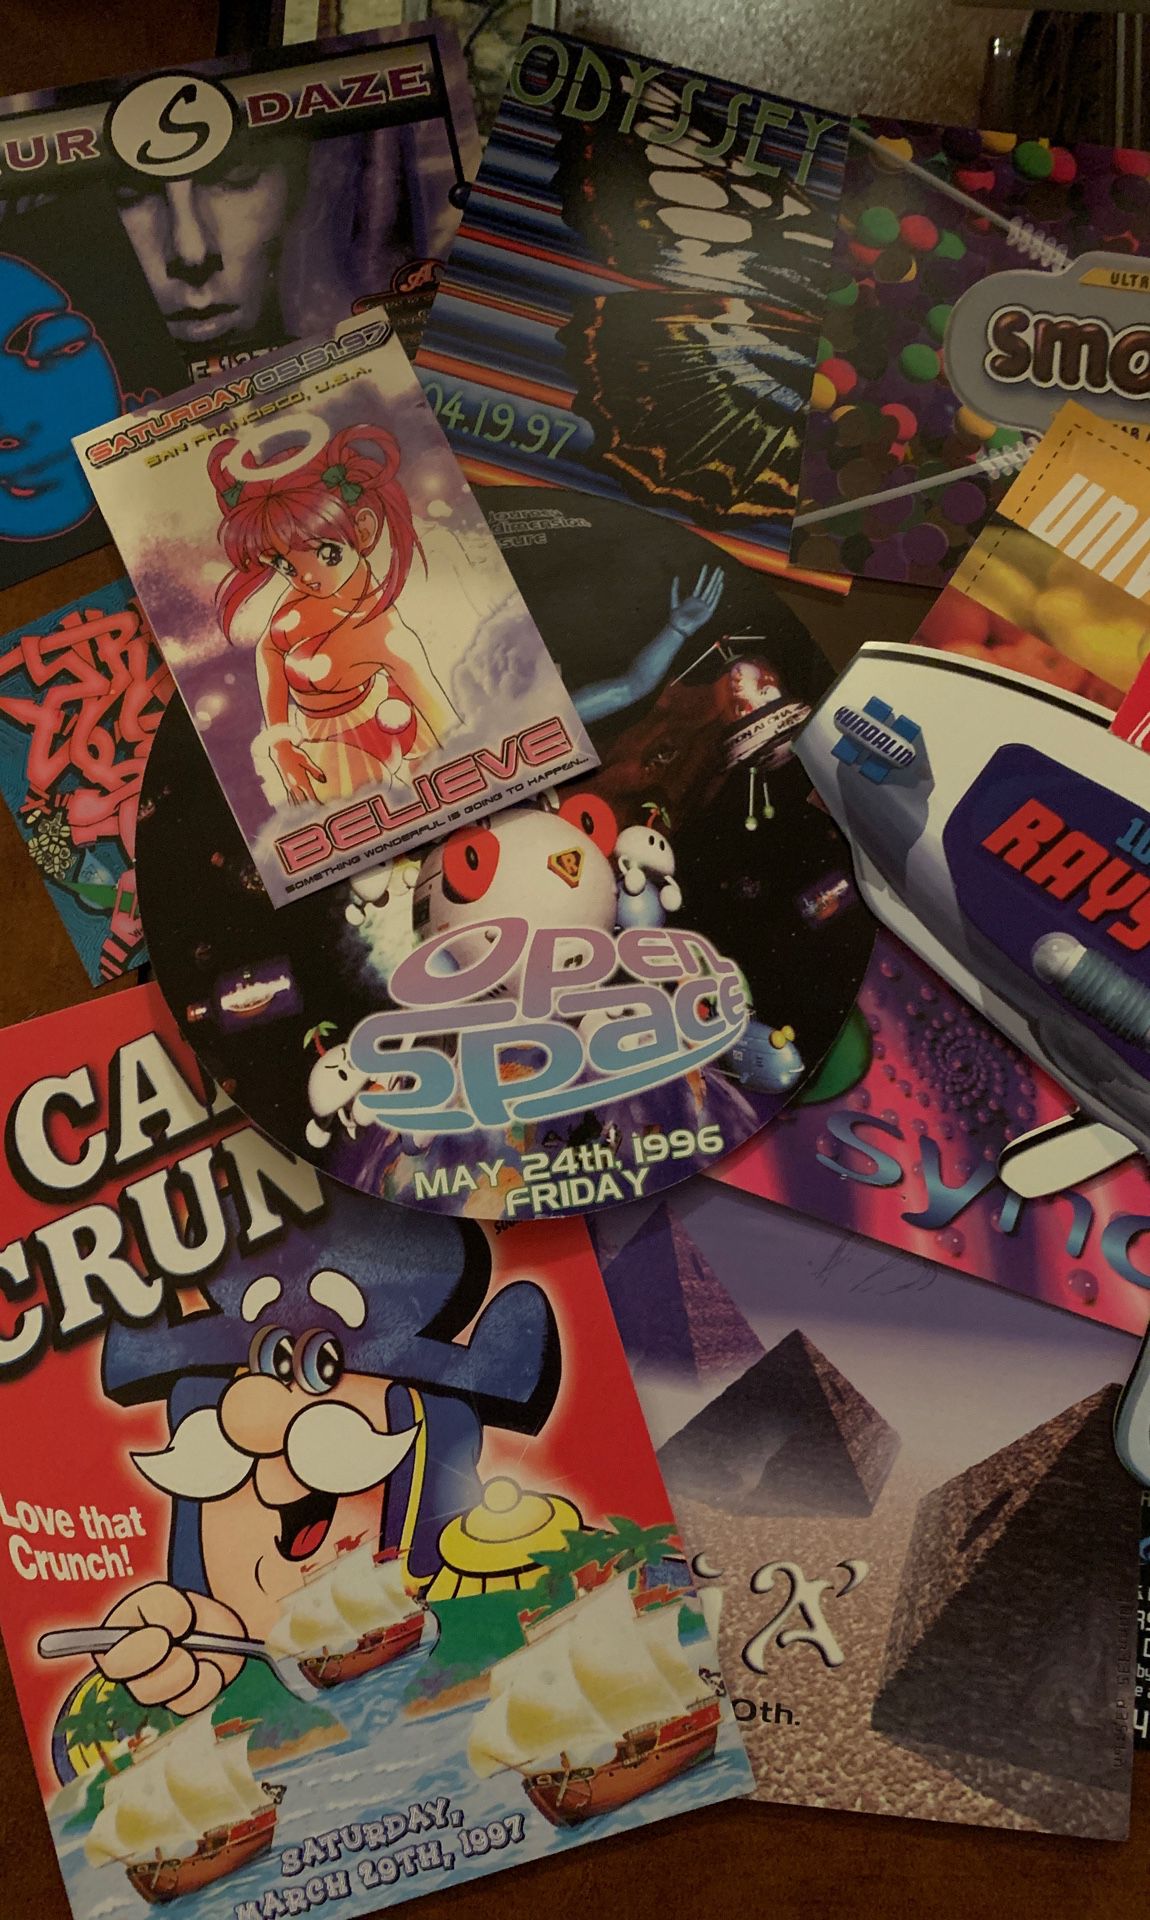 90’s Rave Festival Event flyers marketing material (collectors)